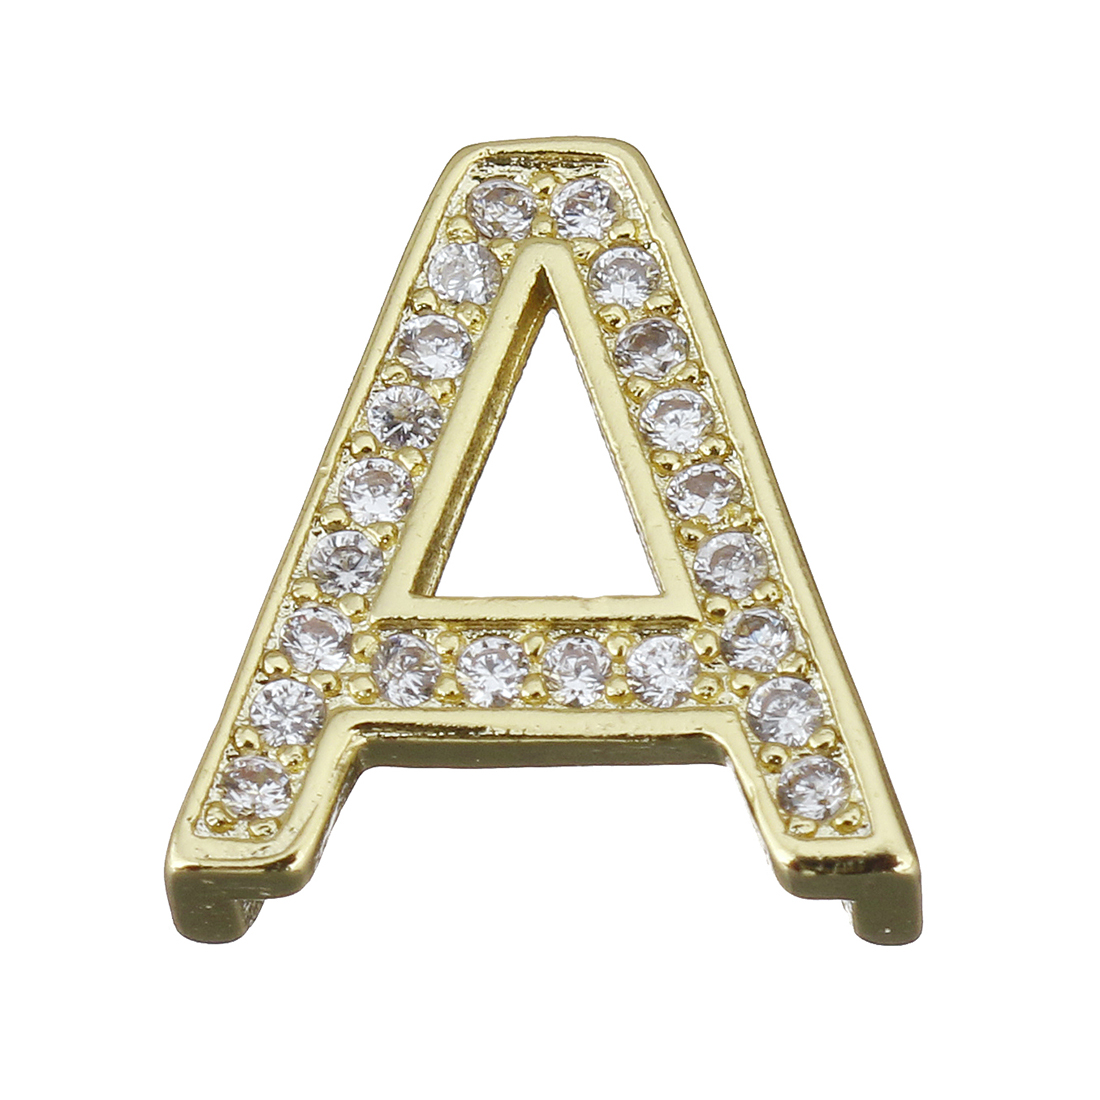  Letter A